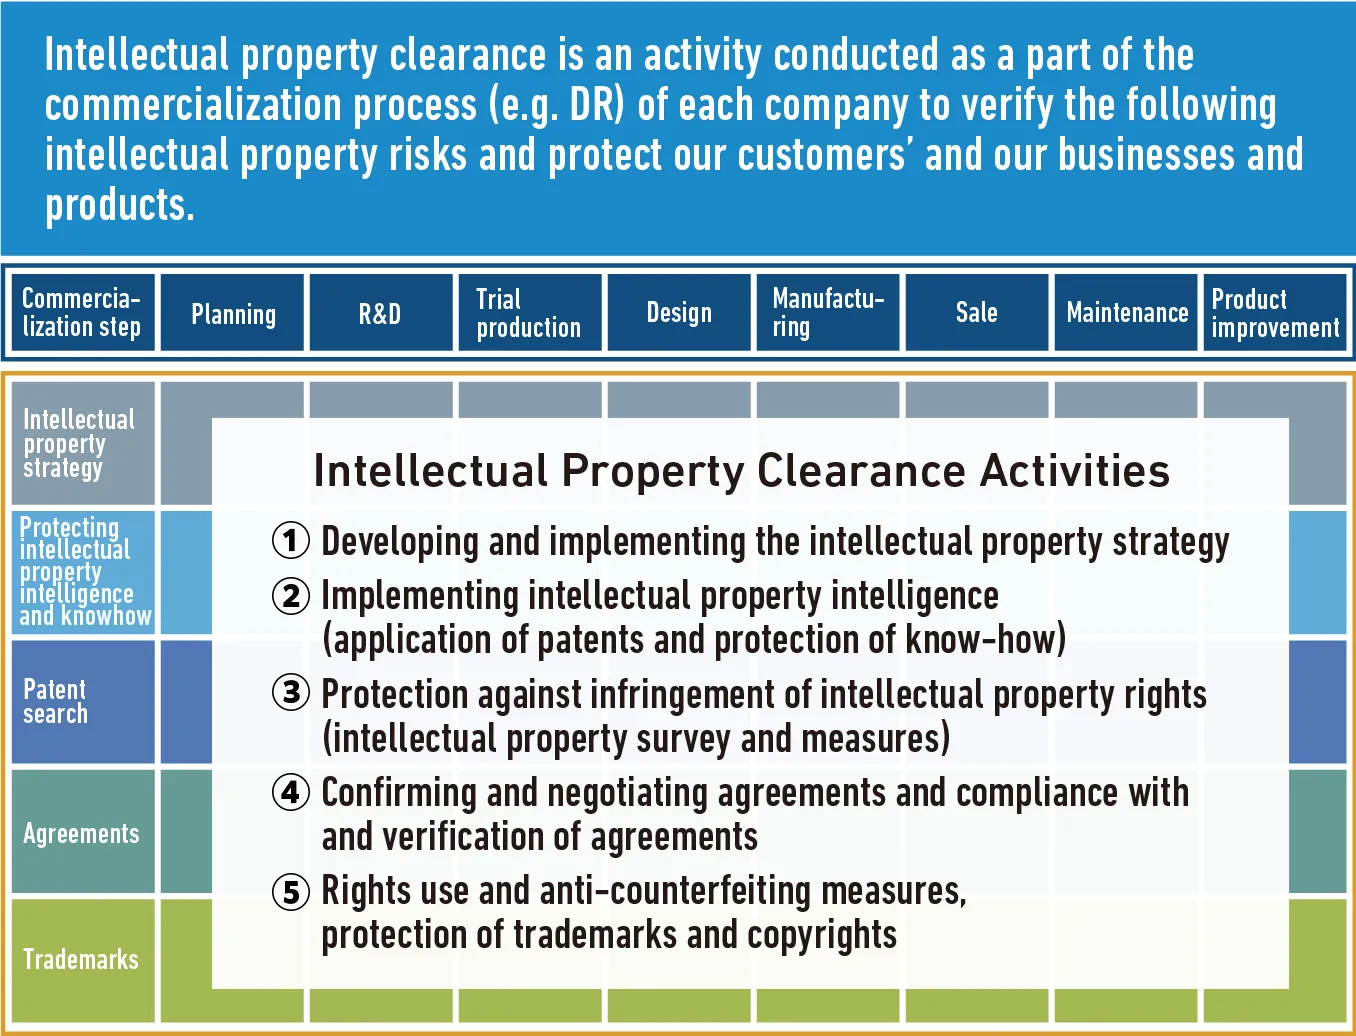 Intellectual Property Risk Management: The Execution of Intellectual Property Clearance